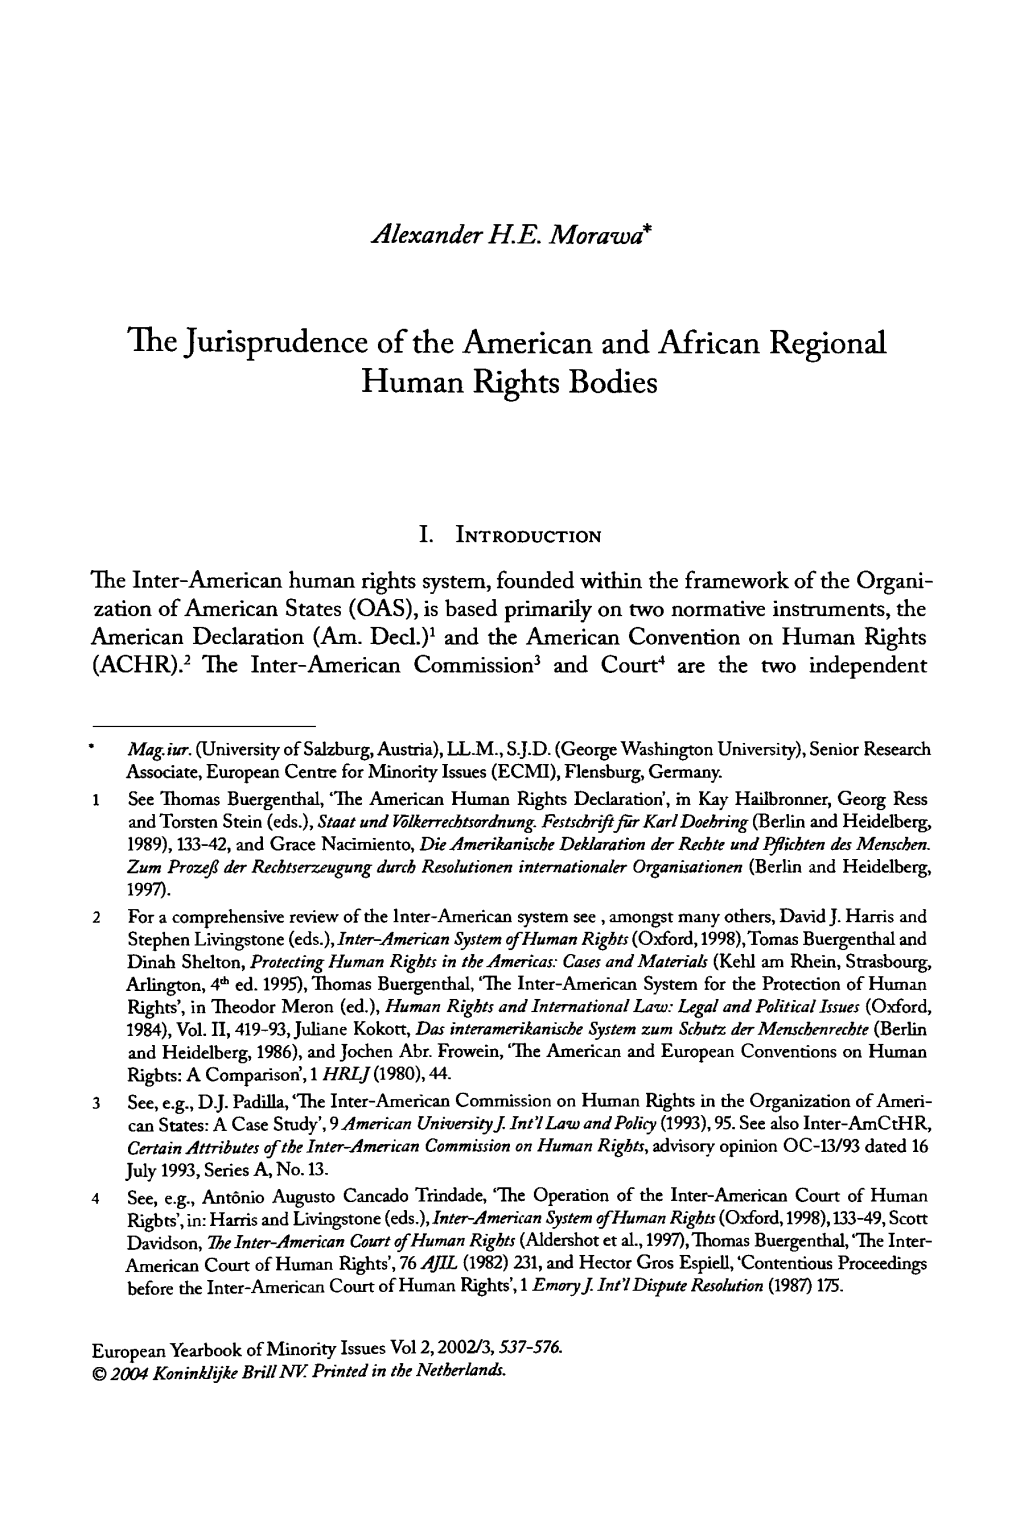 The Jurisprudence of the American and African Regional Human Rights Bodies